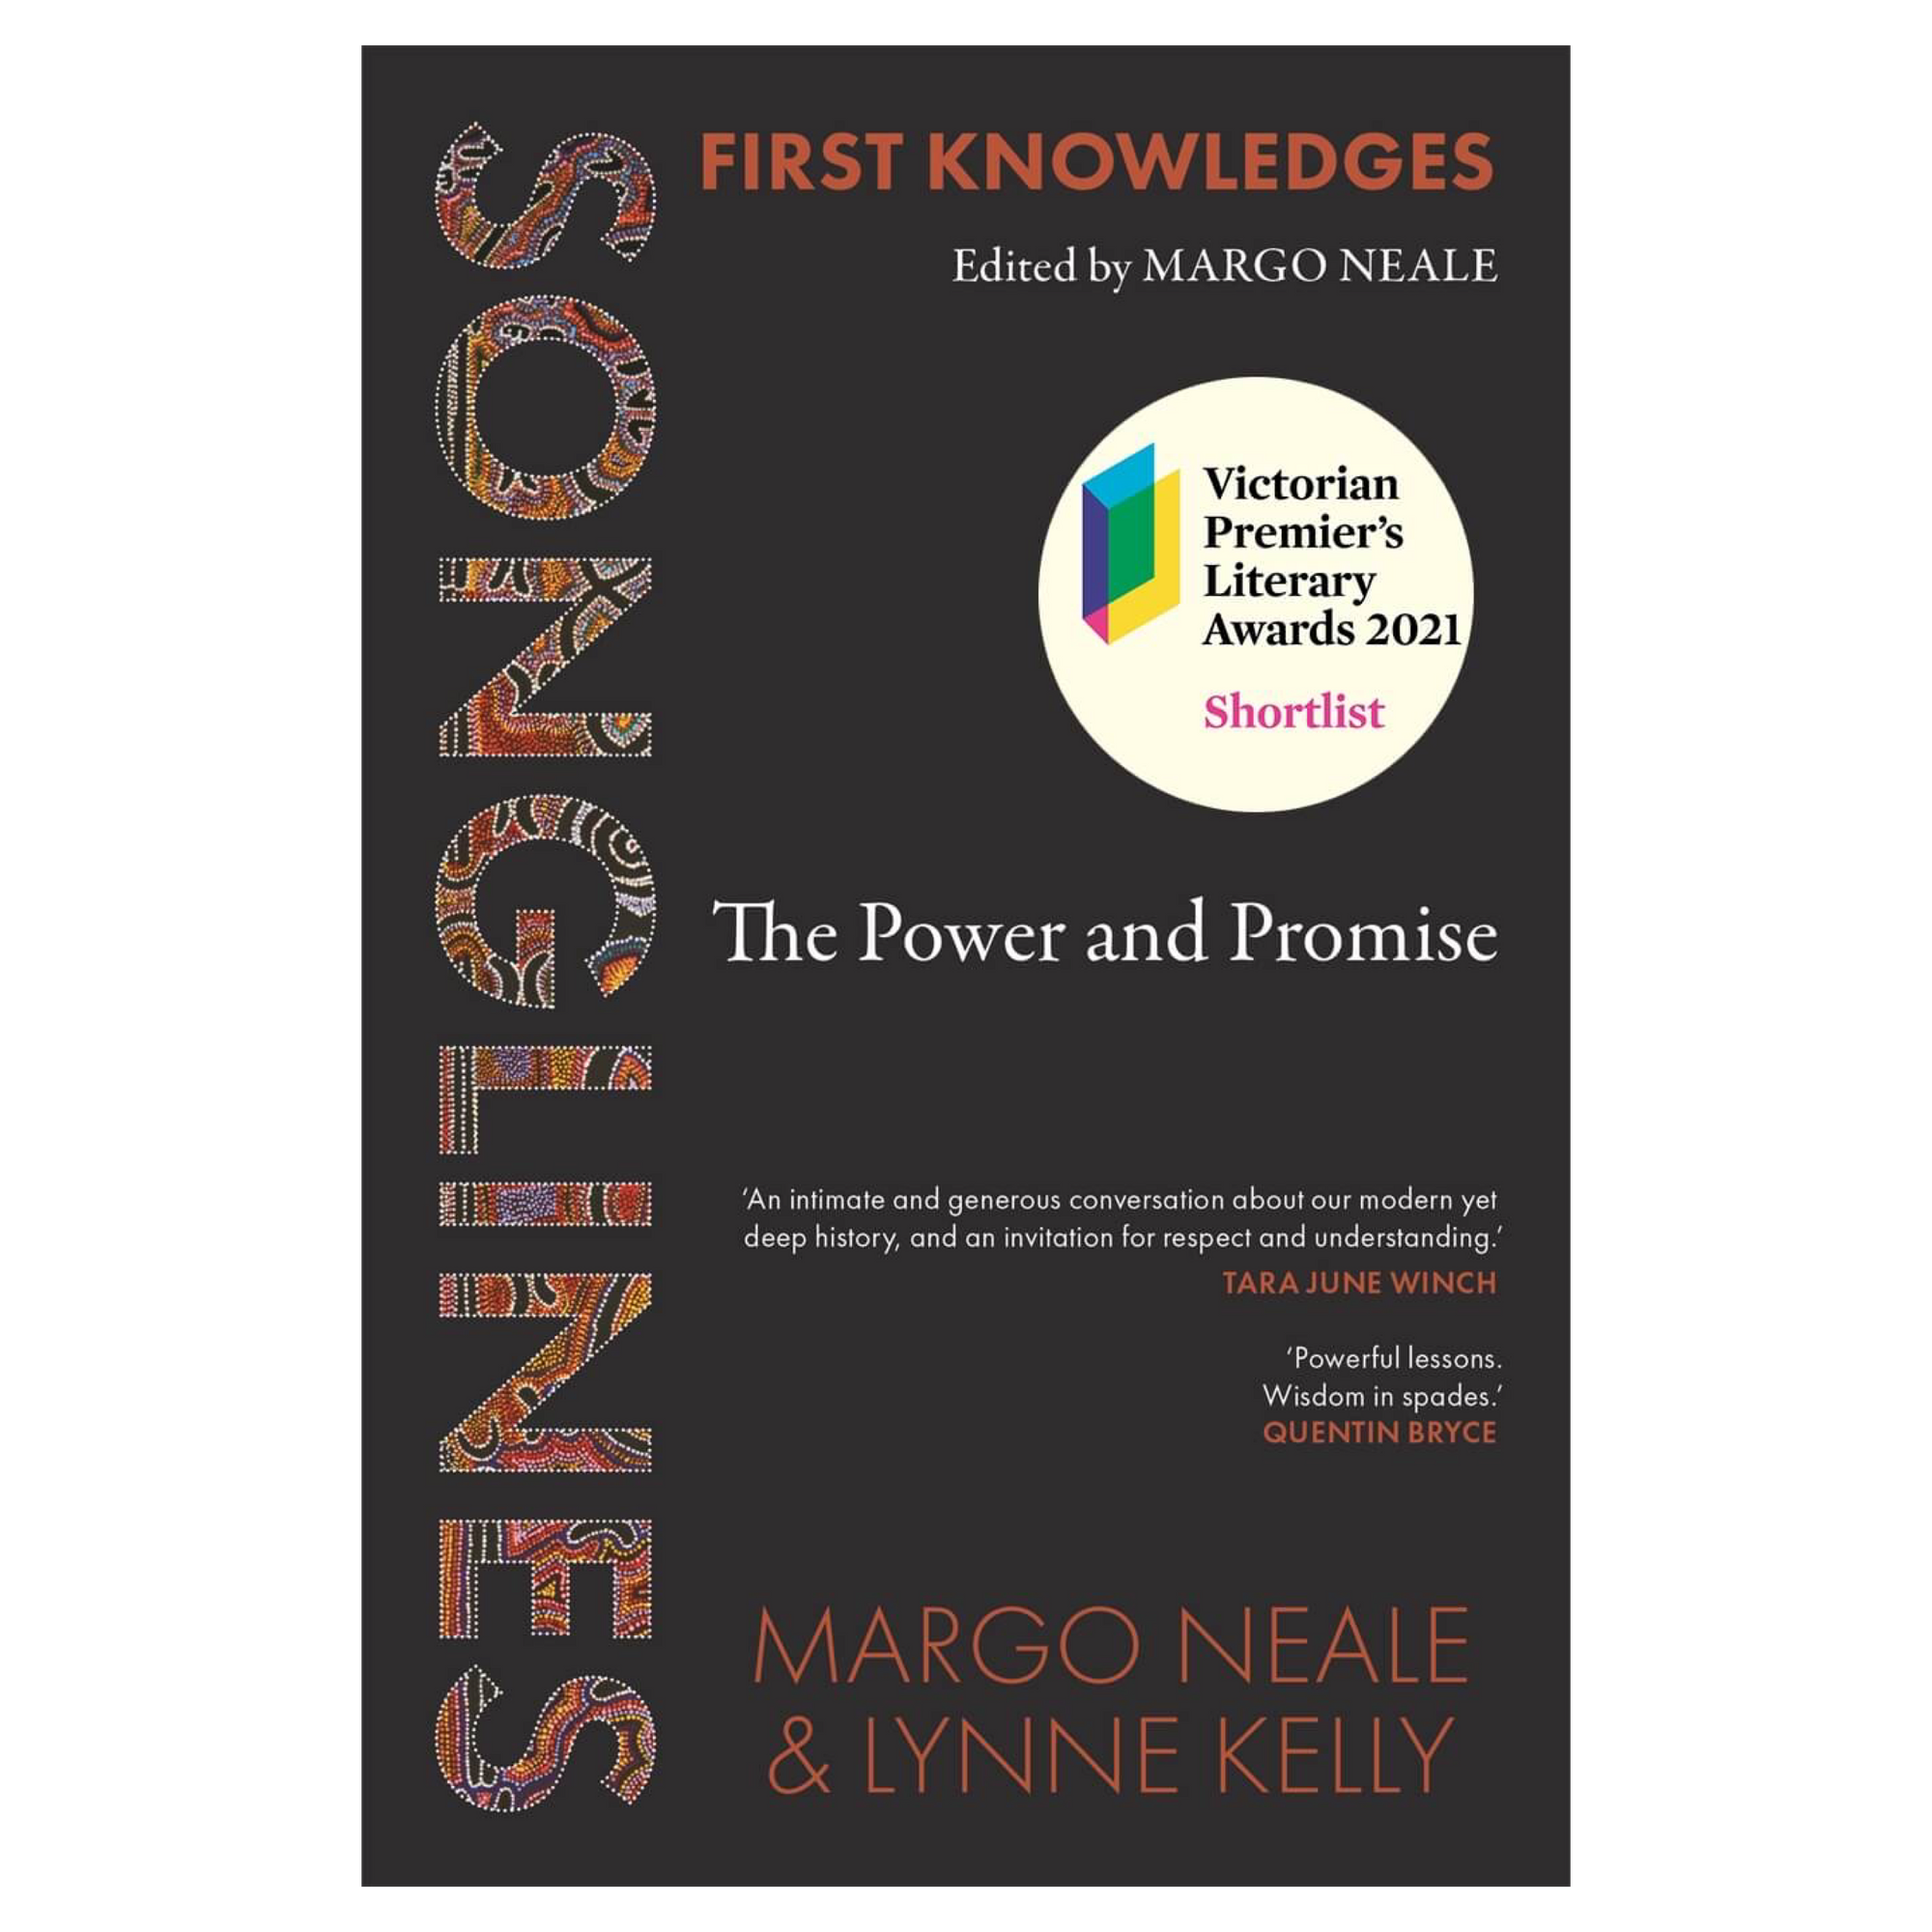 First Knowledges - Songlines